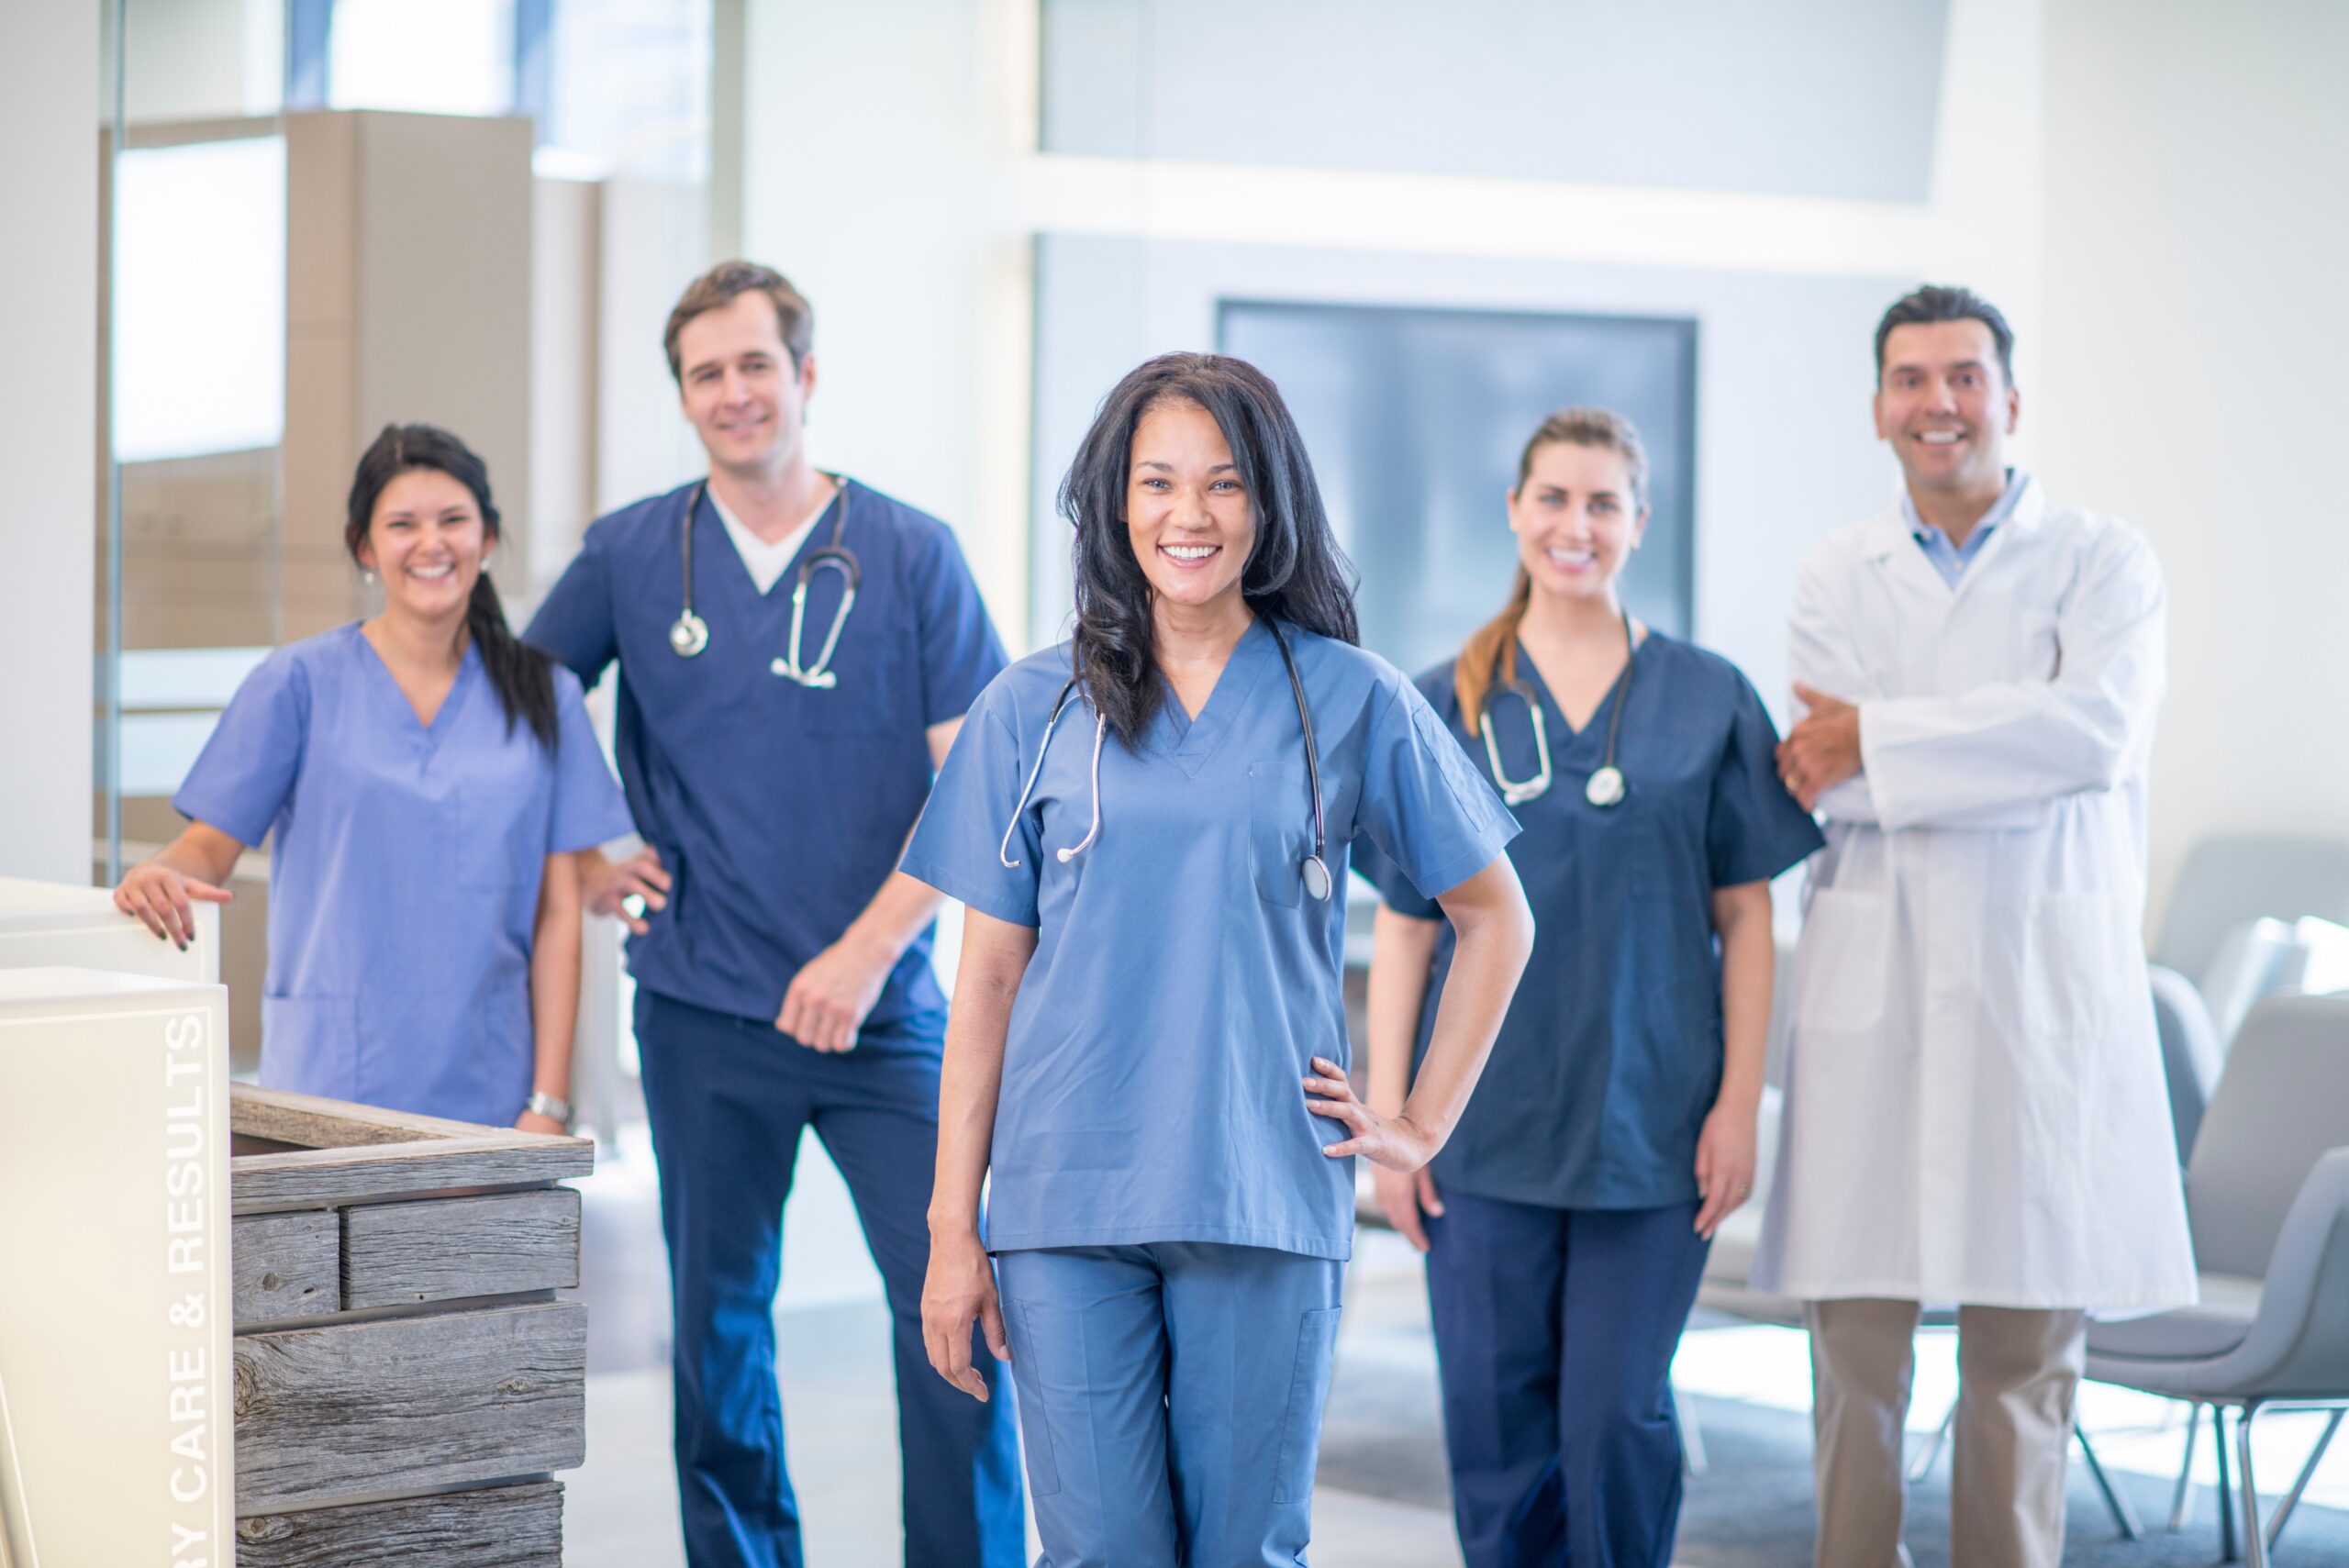 The Surgeon’s Office Staff: A Valuable Asset to the Hospital